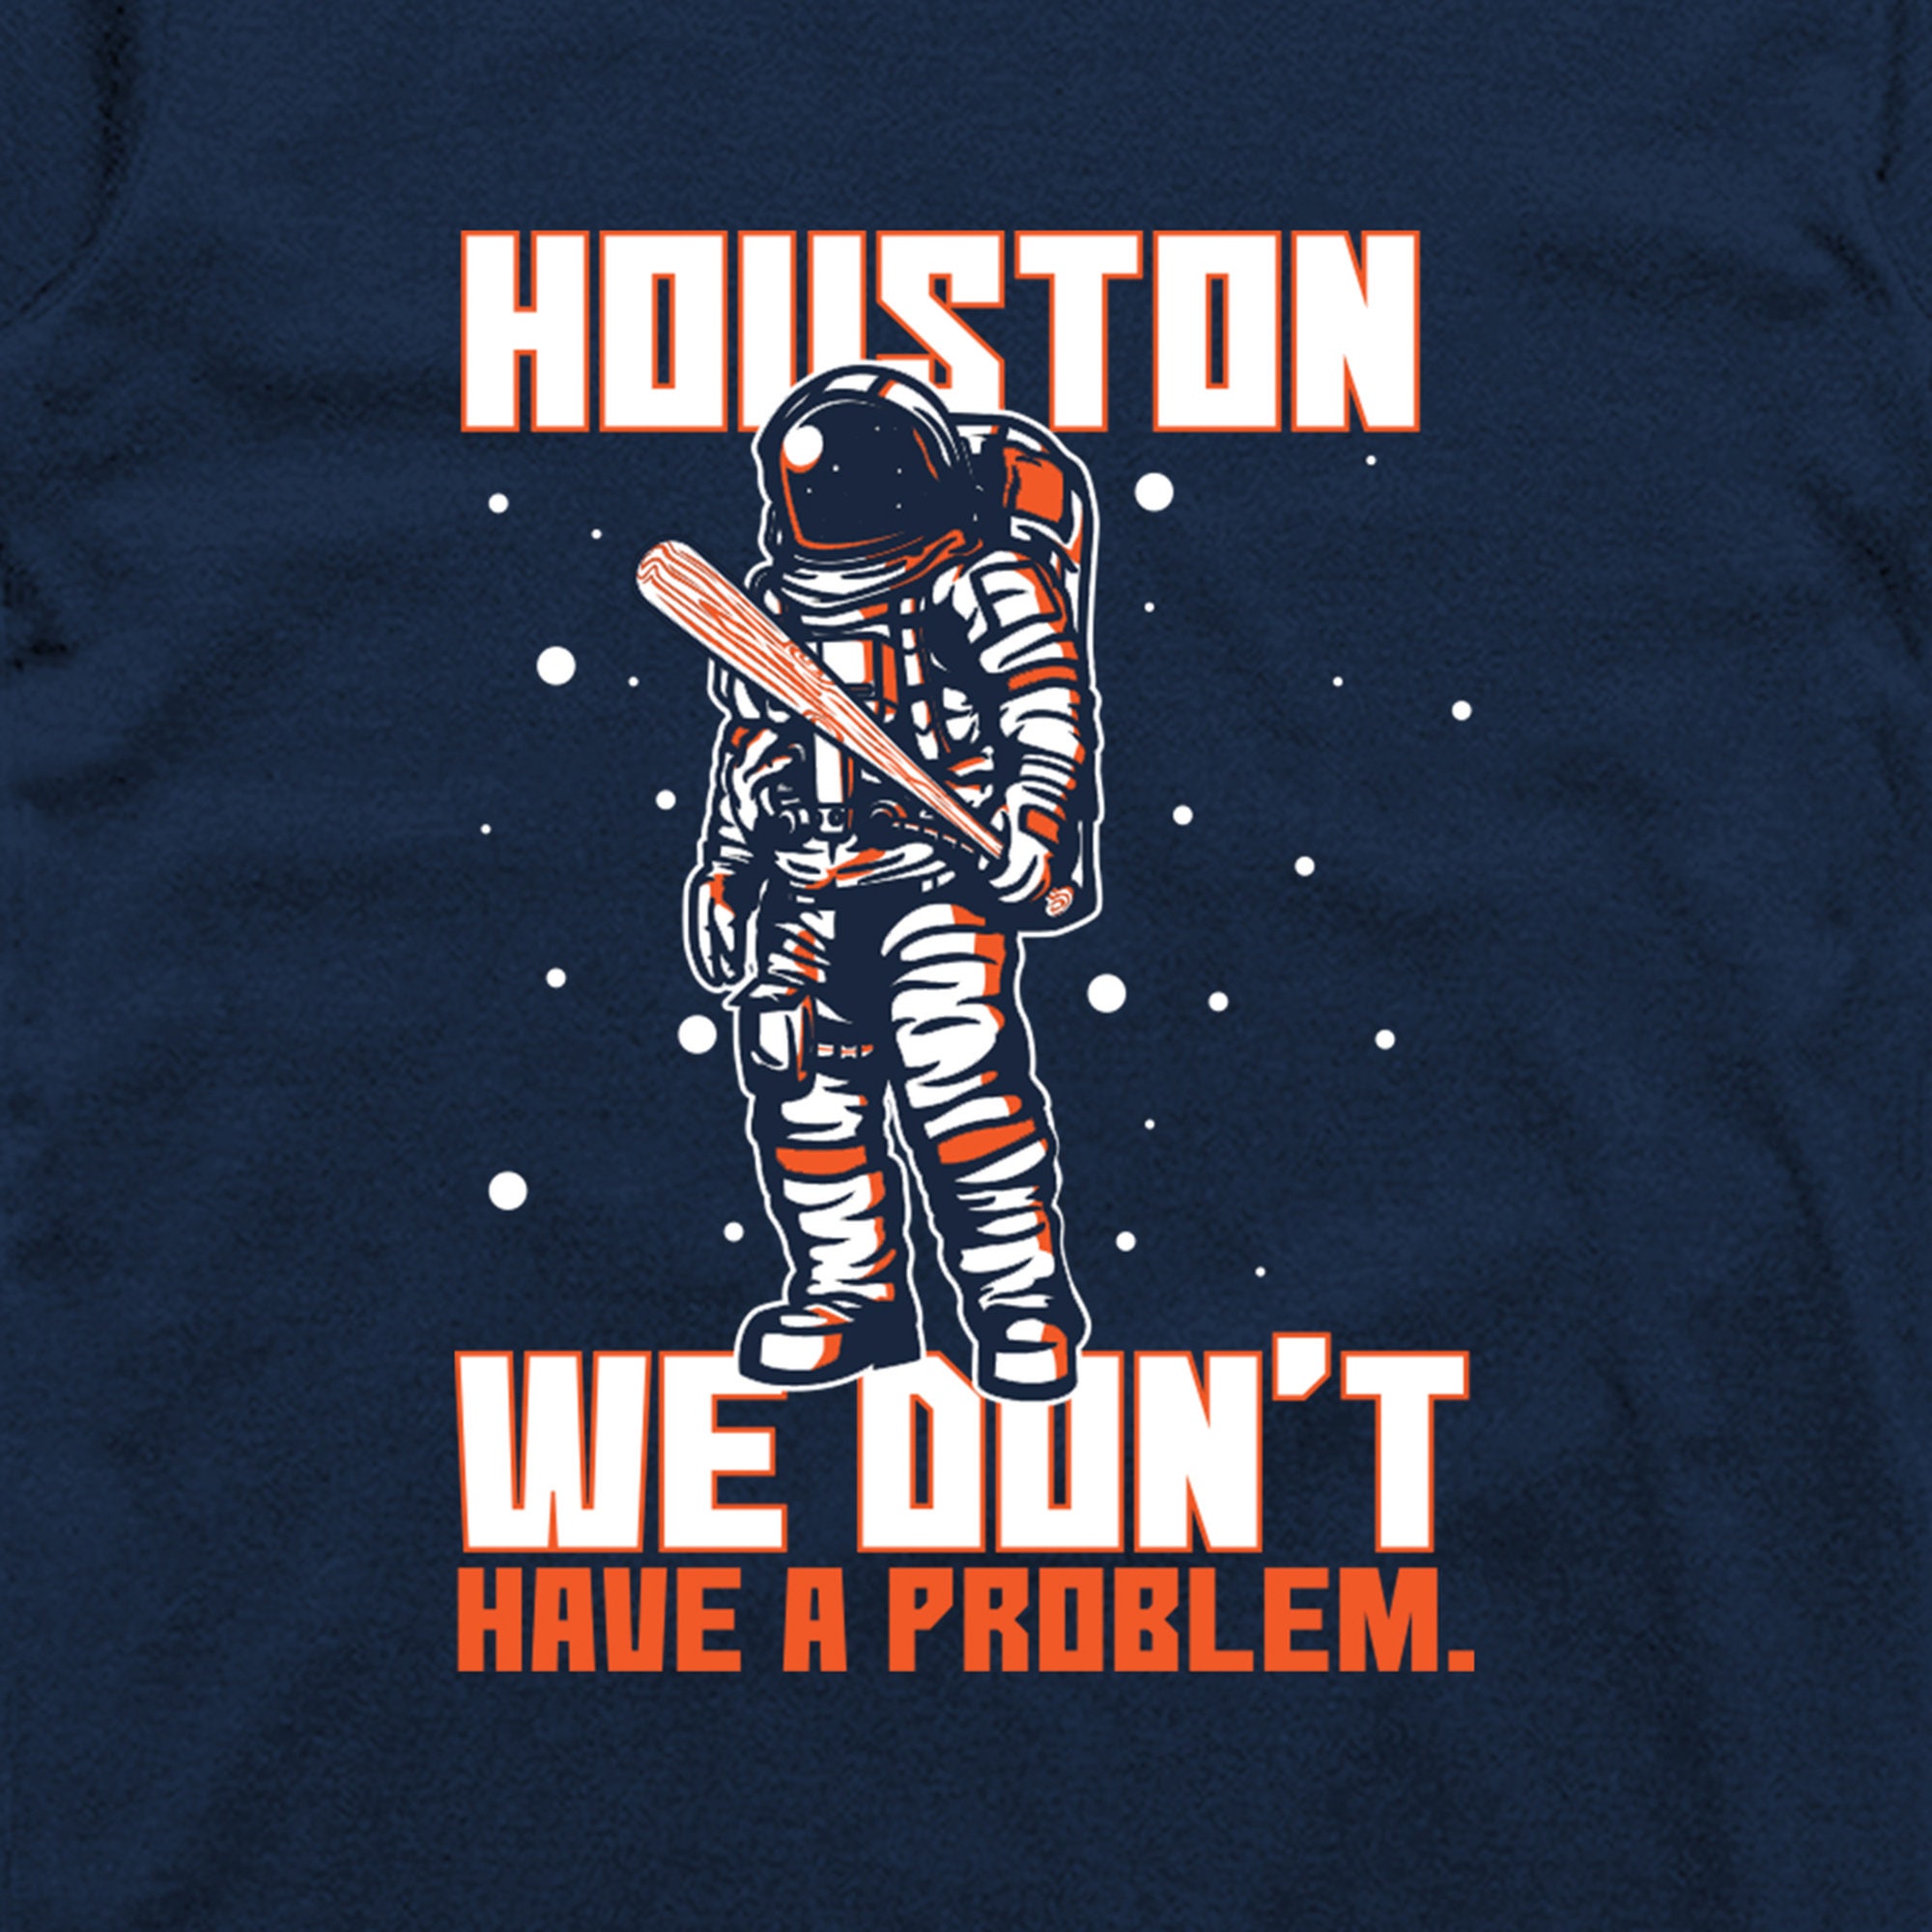 Houston we have a hockey team! The Houston Astronauts will be